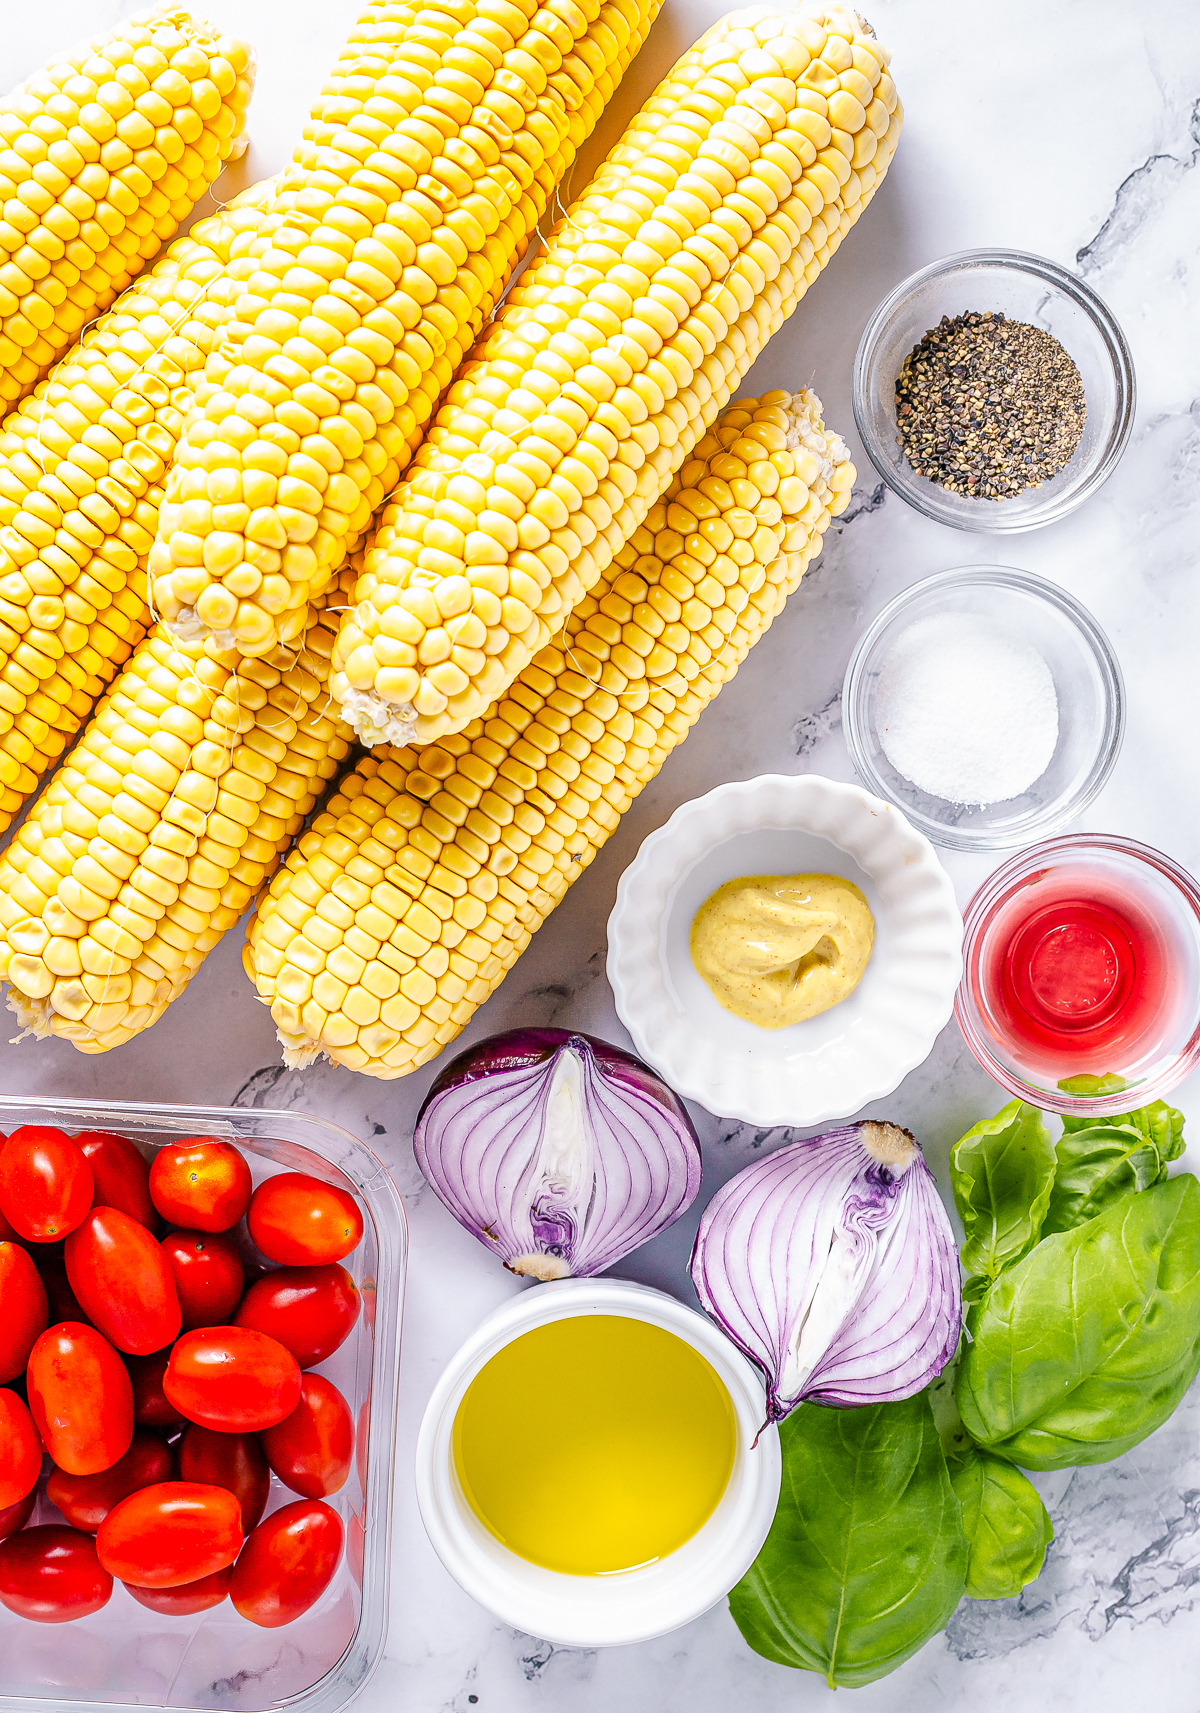 Ingredients needed to make Corn and Tomato Salad